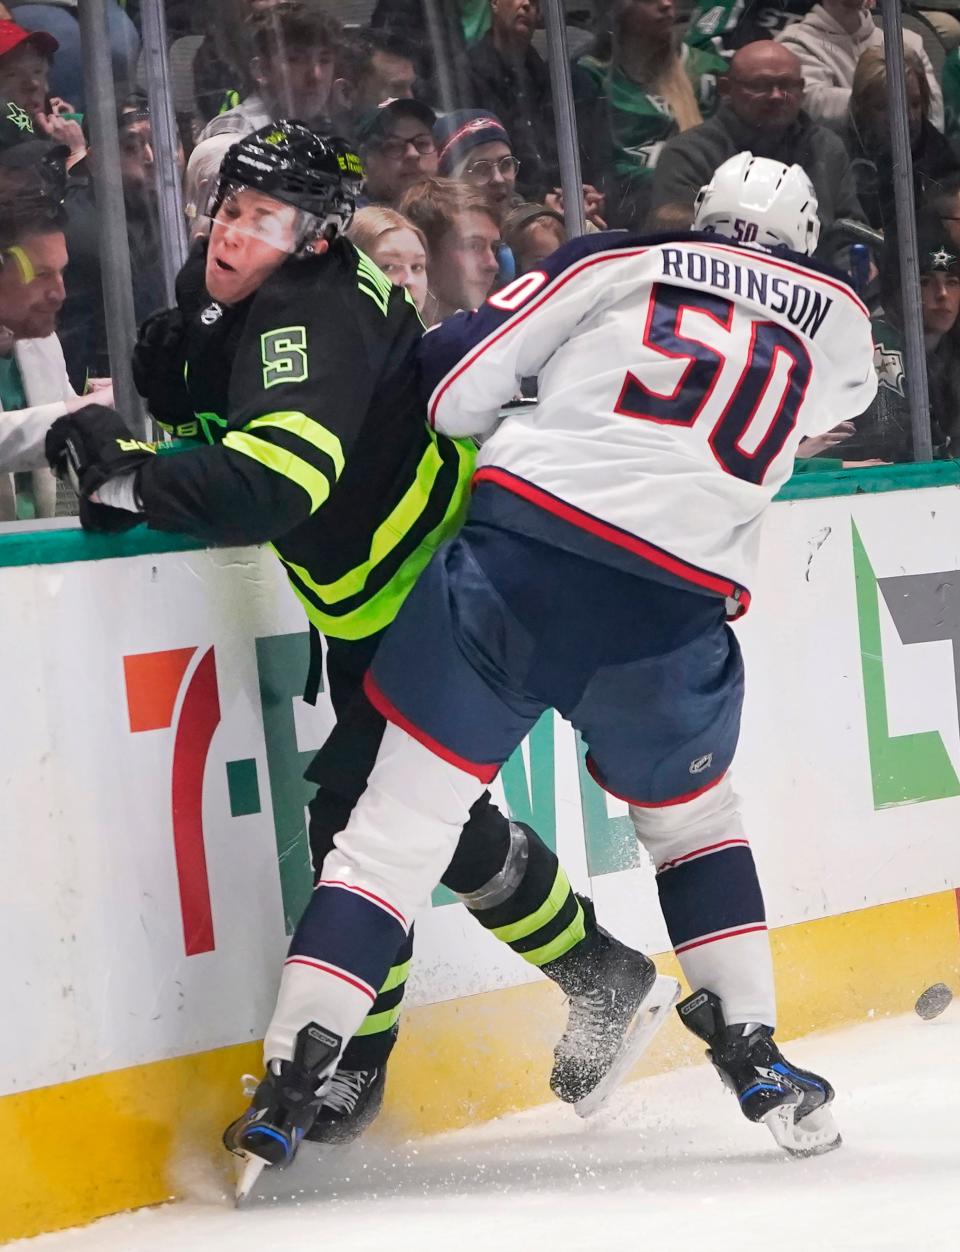 Columbus Blue Jackets left wing Eric Robinson (50) hits Dallas Stars defenseman Nils Lundkvist (5) into the boards during the second period of an NHL hockey game in Dallas, Saturday, Feb. 18, 2023. (AP Photo/LM Otero)